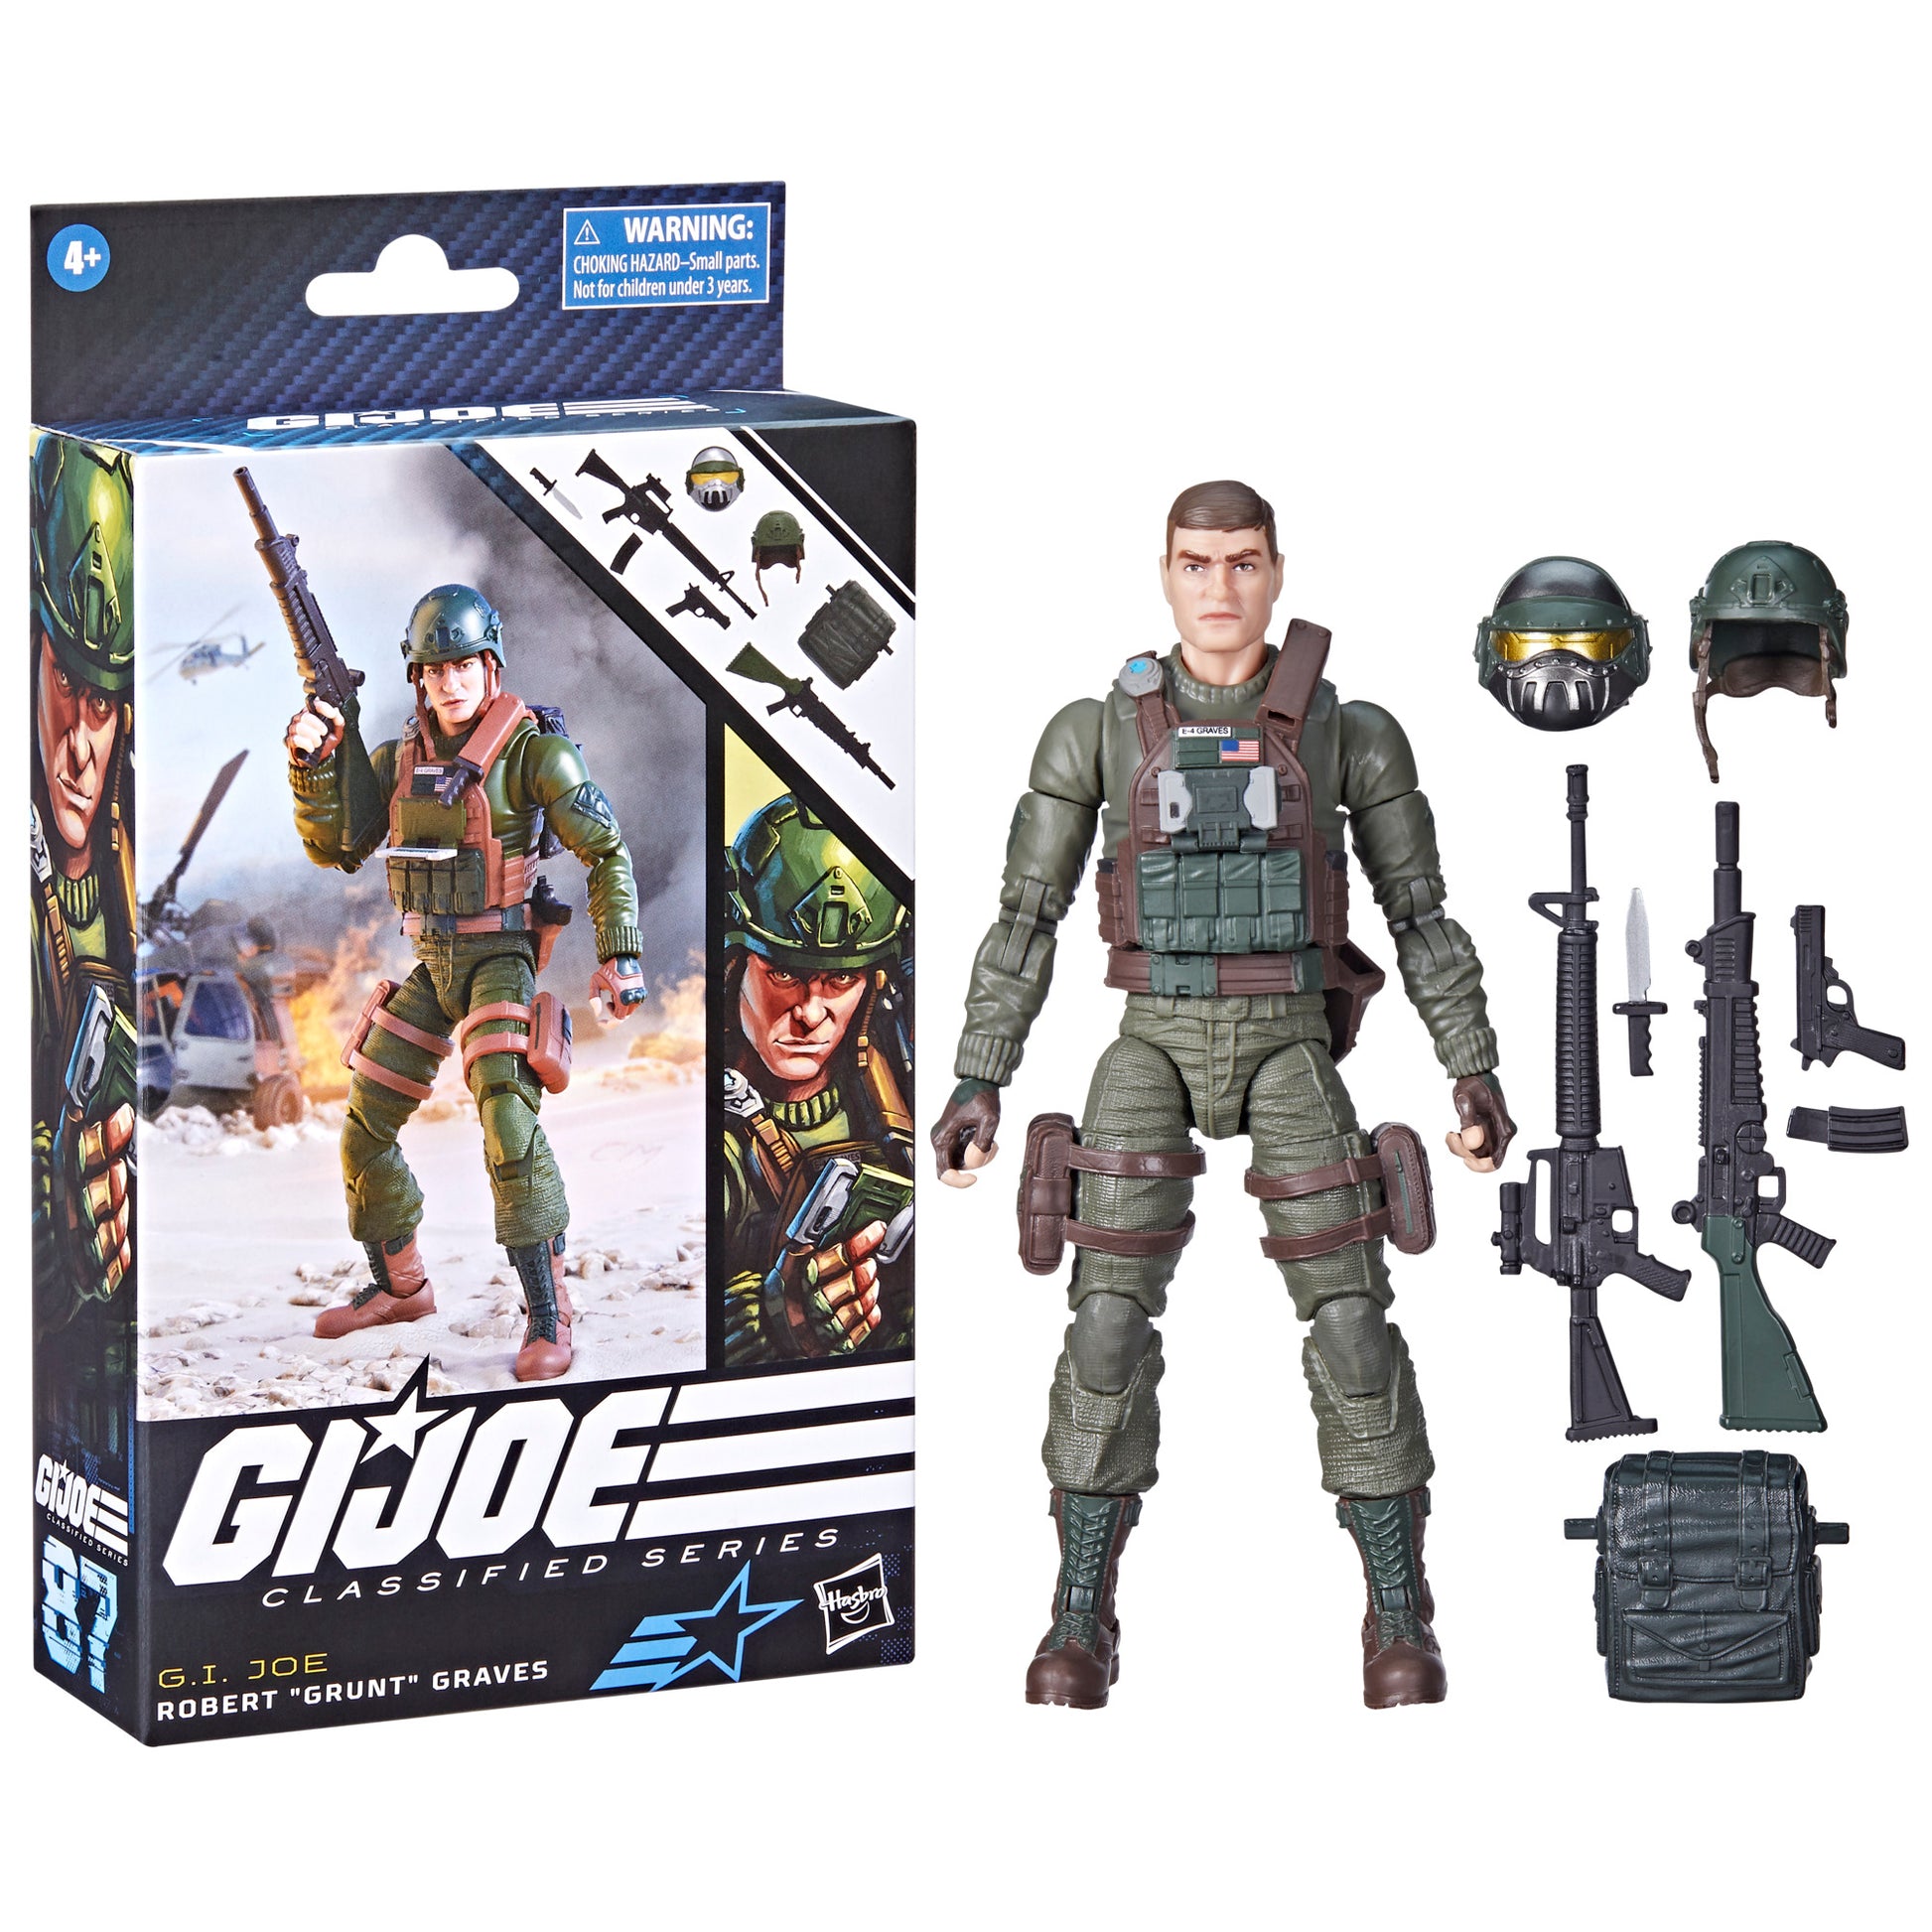  G.I. Joe Classified Series Retro Cardback Recondo, Collectible  6-Inch Action Figure with 7 Accessories : Toys & Games